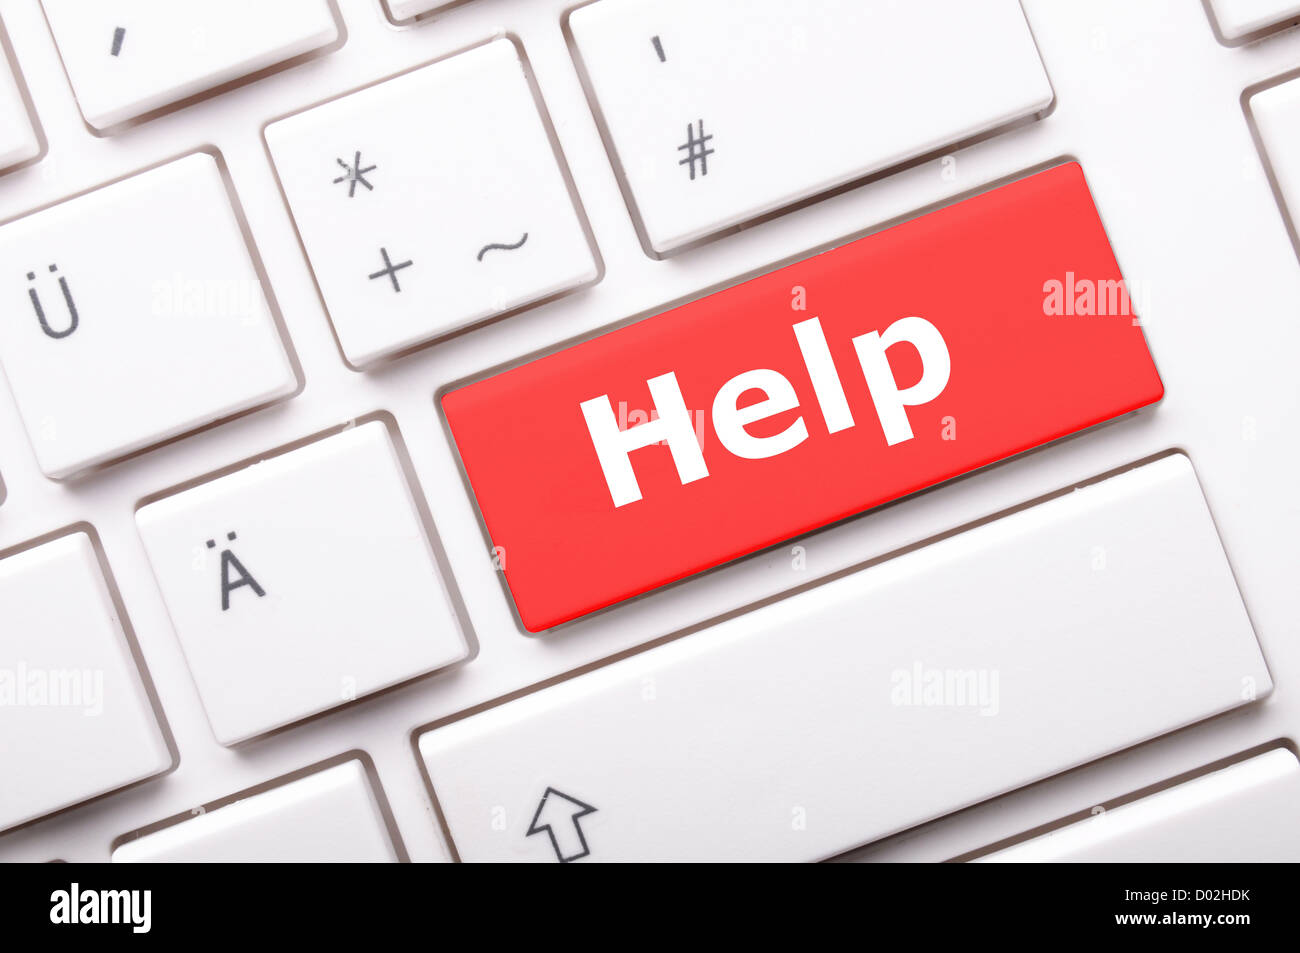 word help on computer keyboard key showing question concept Stock Photo